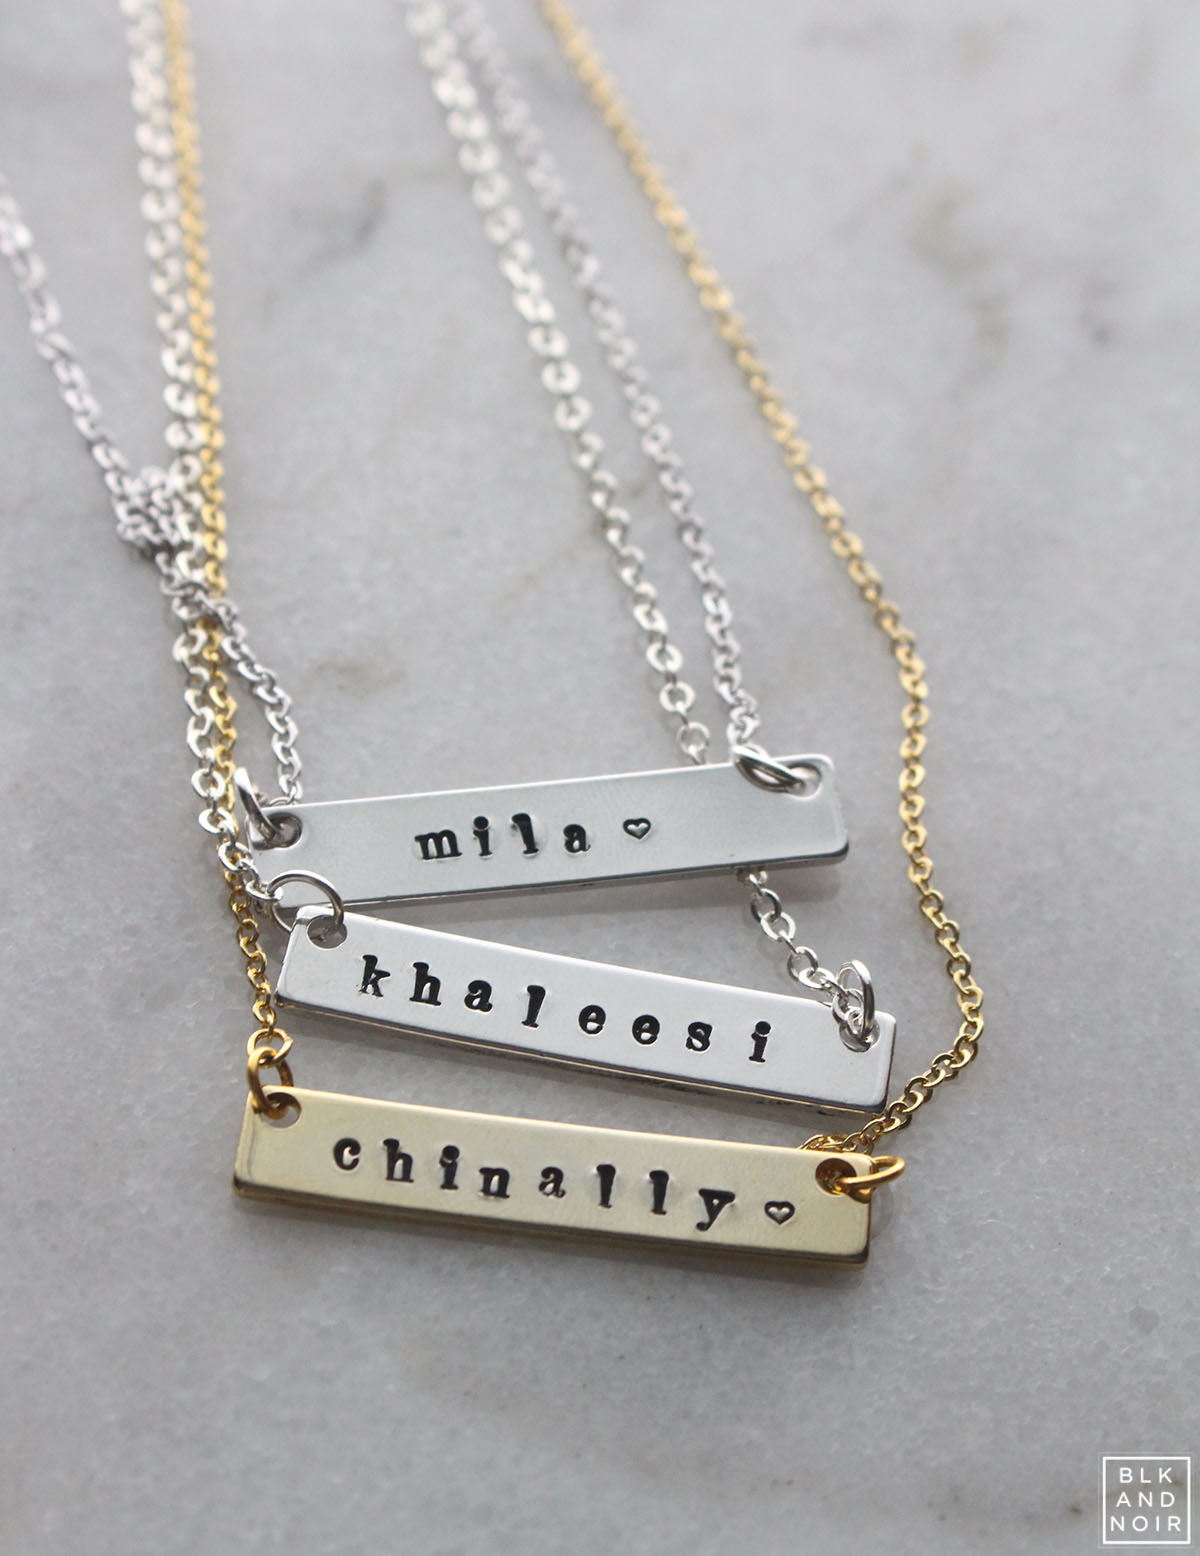 CUSTOM NAMETAG NECKLACE BLK AND NOIR